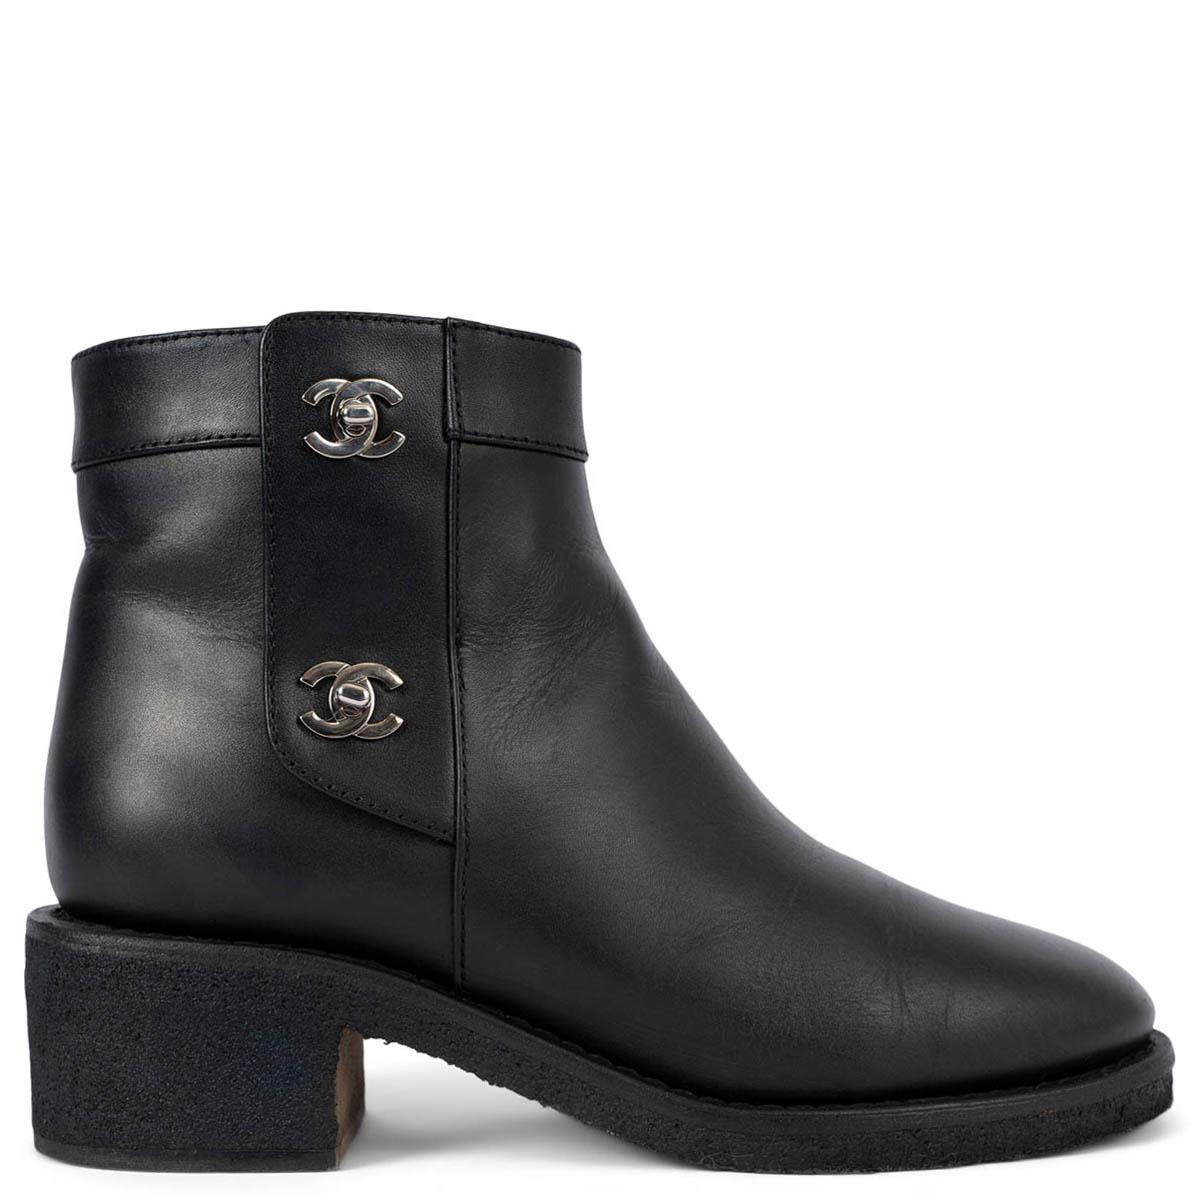 CHANEL black leather REV TURNLOCK Ankle Boots Shoes 38 For Sale